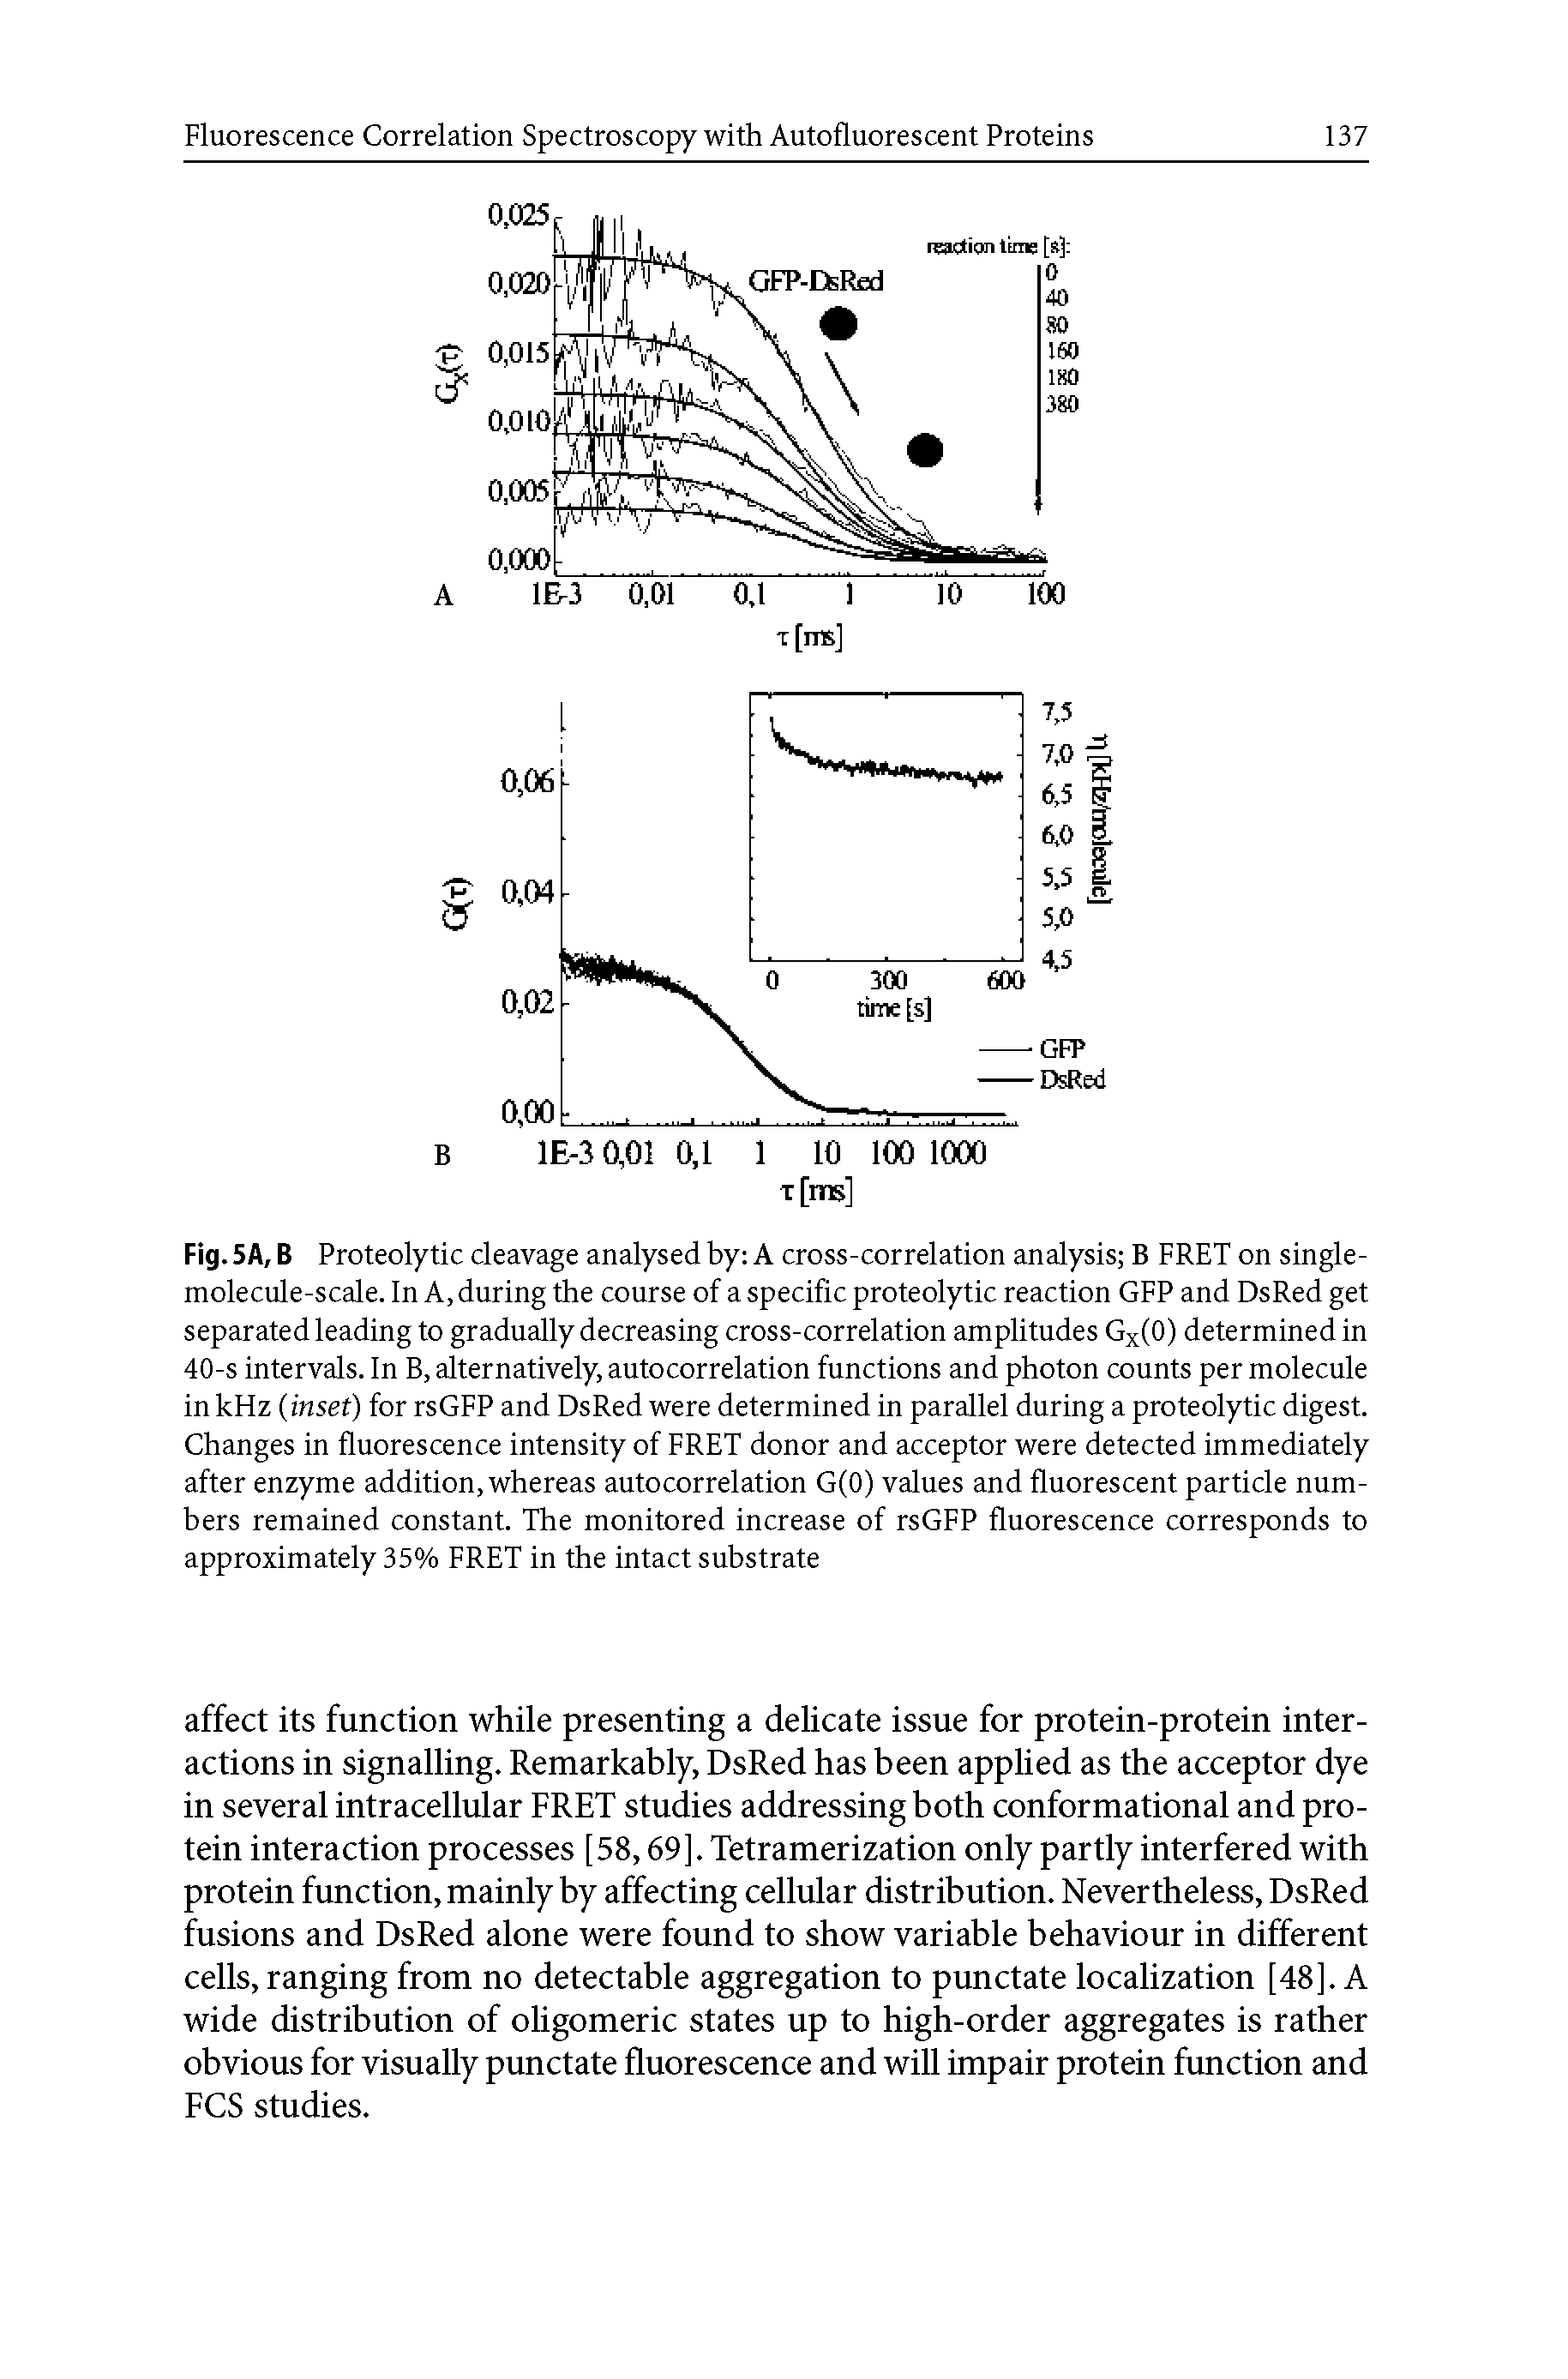 Fig. 5A, B Proteolytic cleavage analysed by A cross-correlation analysis B FRET on single-molecule-scale. In A, during the course of a specific proteolytic reaction GFP and DsRed get separated leading to gradually decreasing cross-correlation amplitudes Gx(0) determined in 40-s intervals, in B, alternatively, autocorrelation functions and photon counts per molecule in kHz (inset) for rsGFP and DsRed were determined in parallel during a proteolytic digest. Changes in fluorescence intensity of FRET donor and acceptor were detected immediately after enzyme addition, whereas autocorrelation G(0) values and fluorescent particle numbers remained constant. The monitored increase of rsGFP fluorescence corresponds to approximately 35% FRET in the intact substrate...